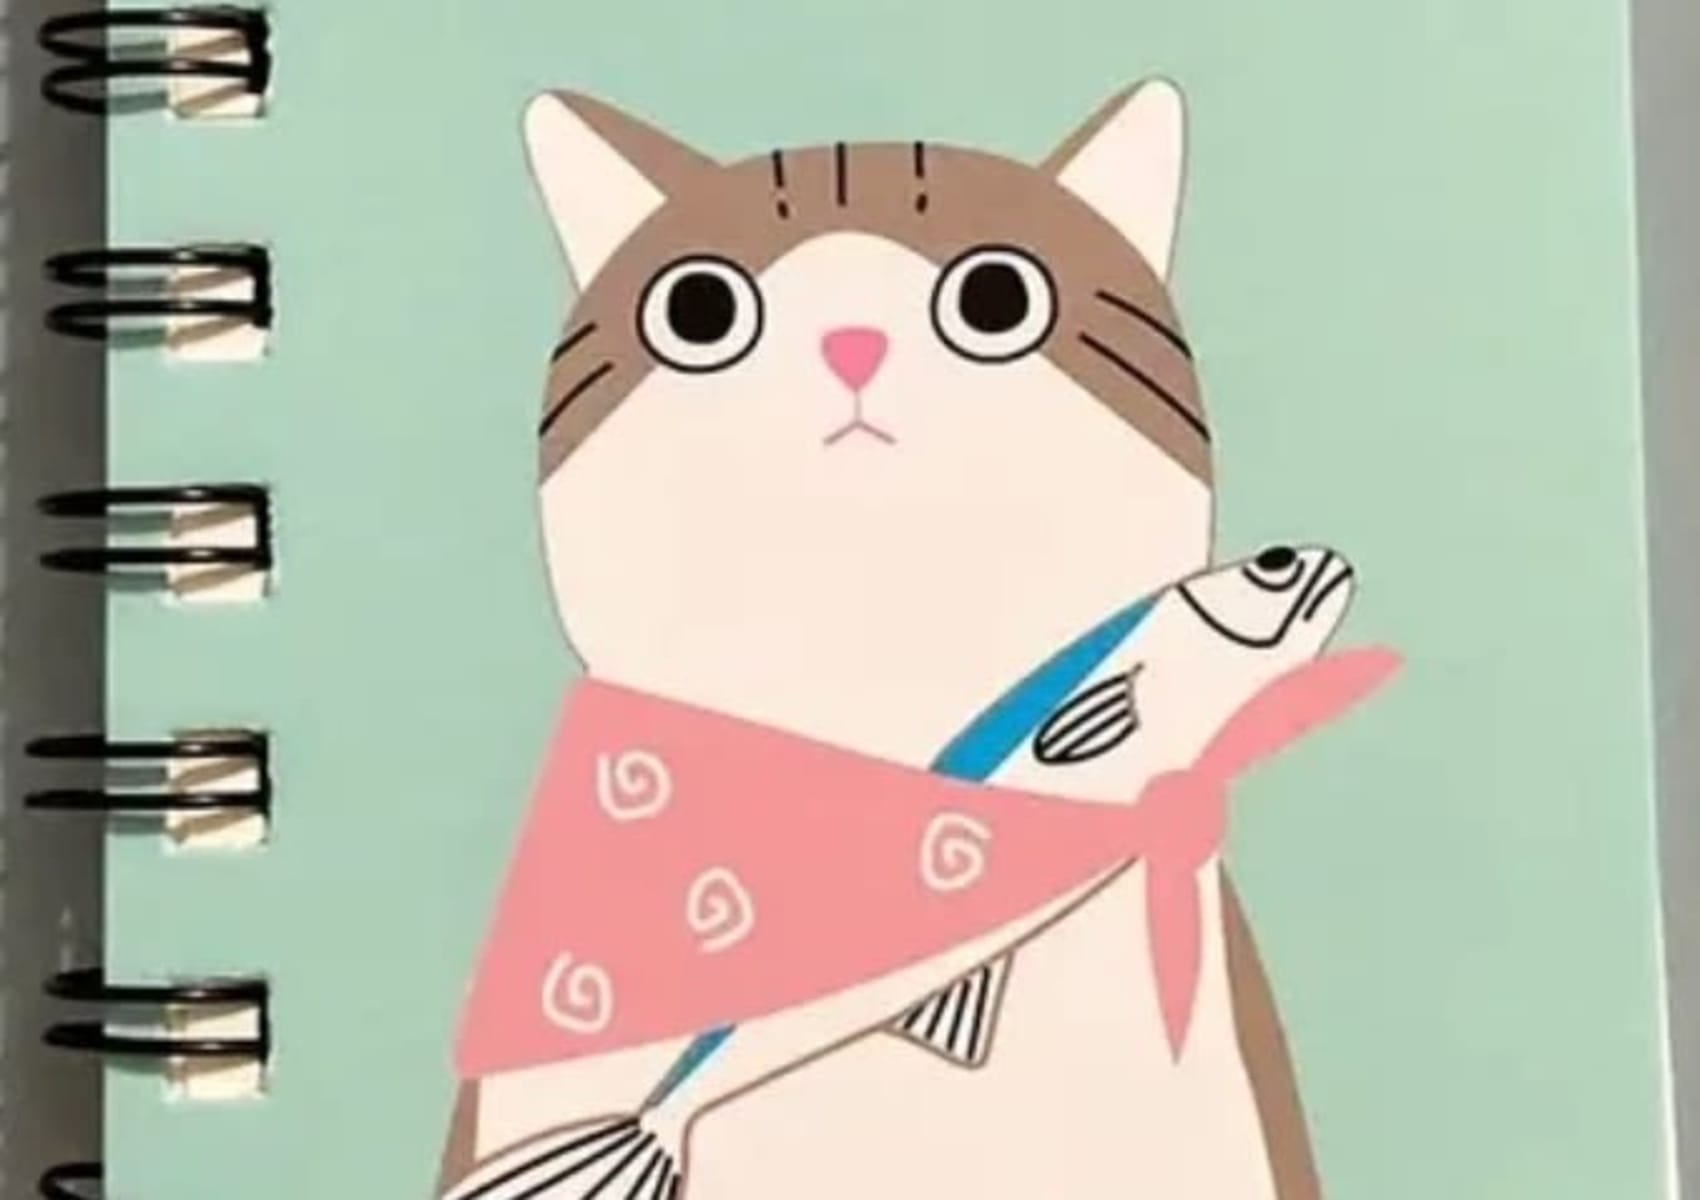 Handbag sized note book with cat and fish